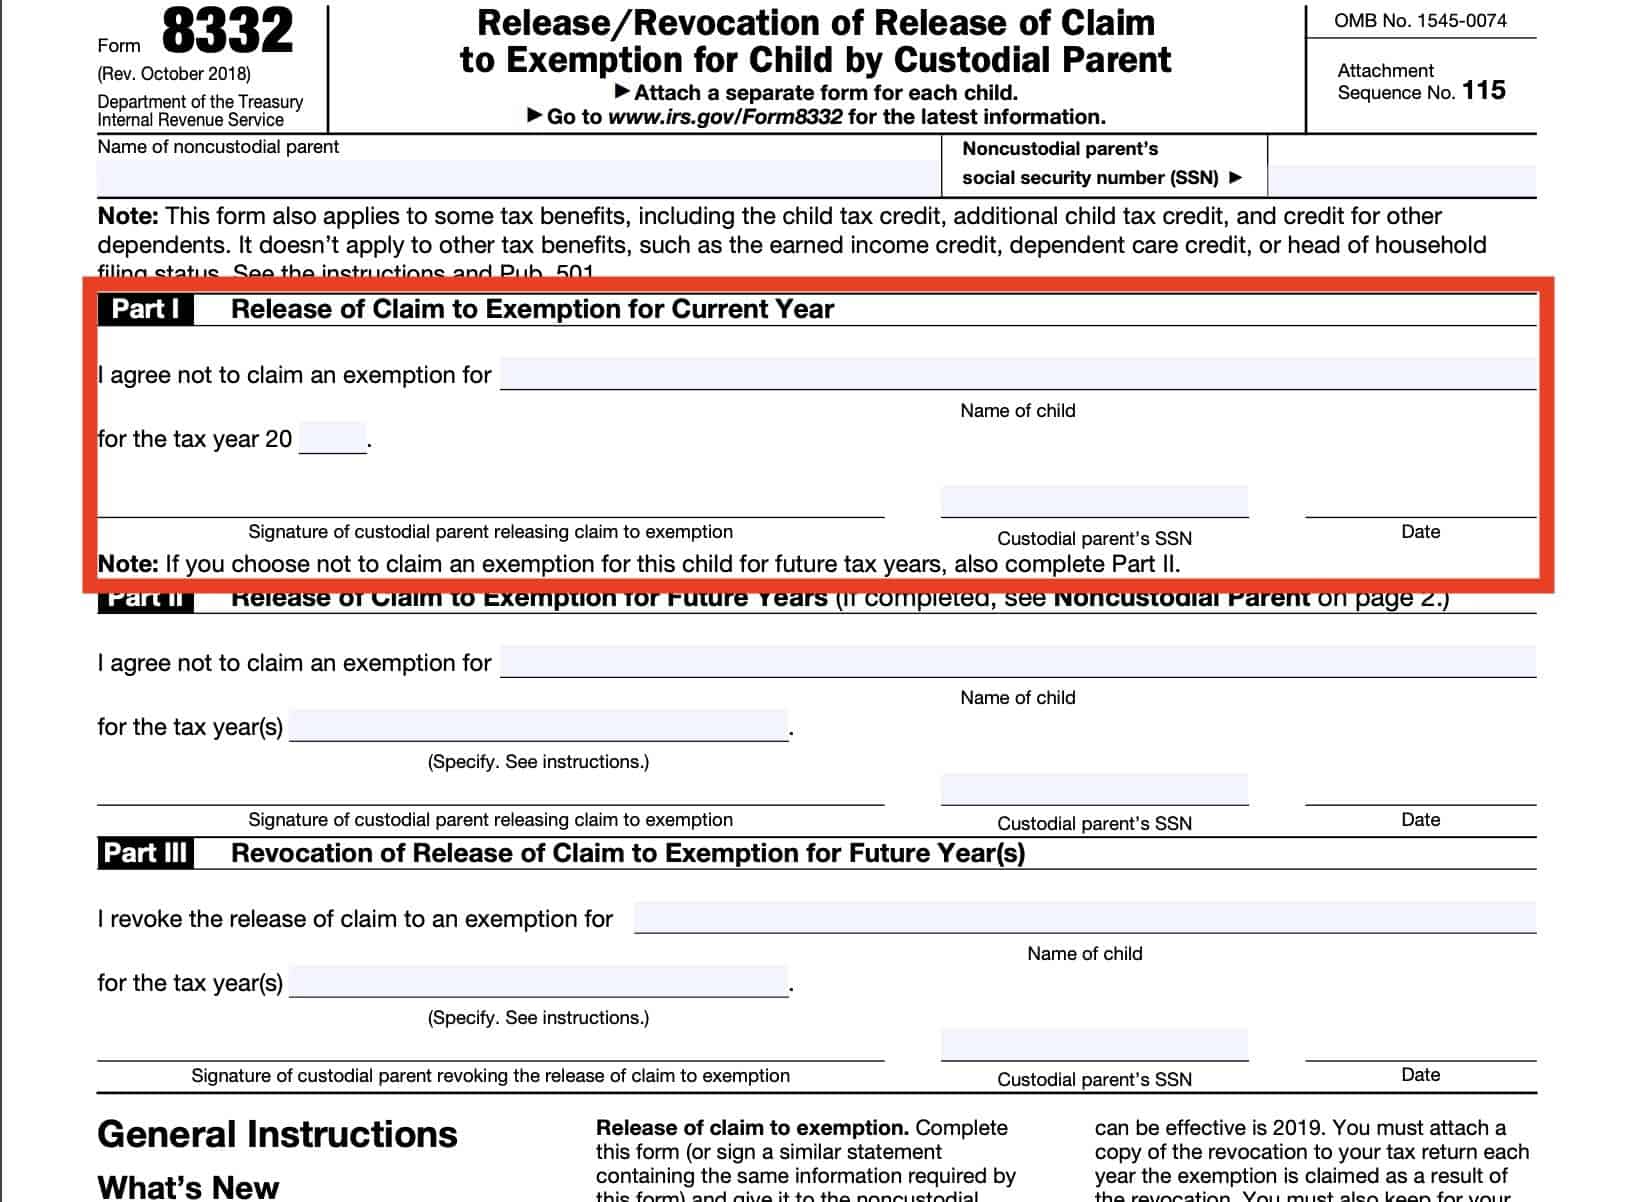 irs form 8332, part i: release of claim to exemption for current year